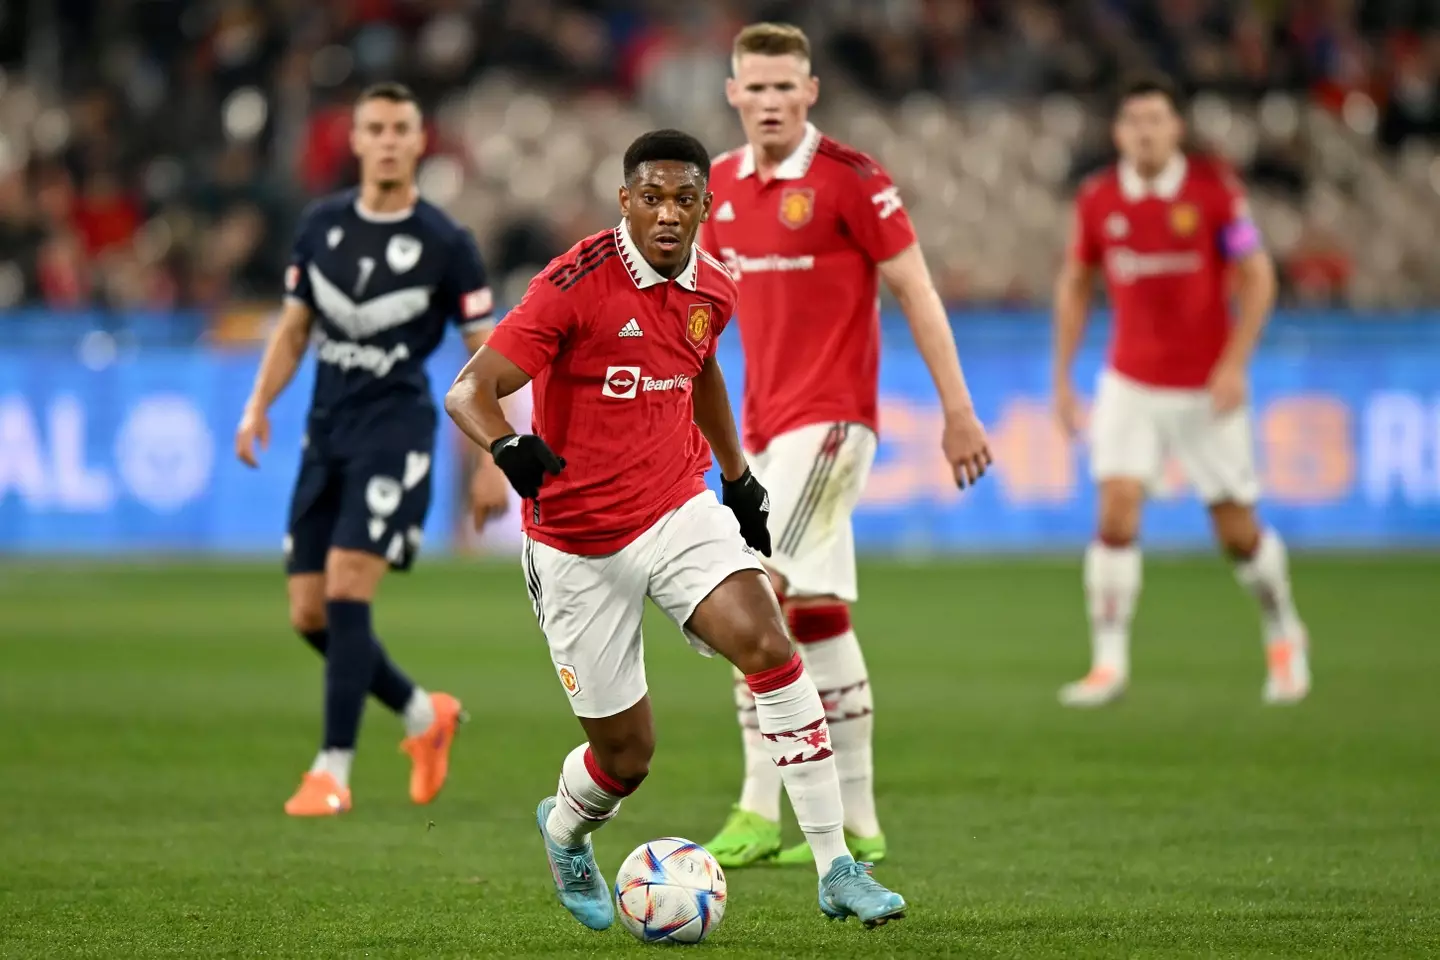 Martial playing against Melbourne Victory. Image: Alamy